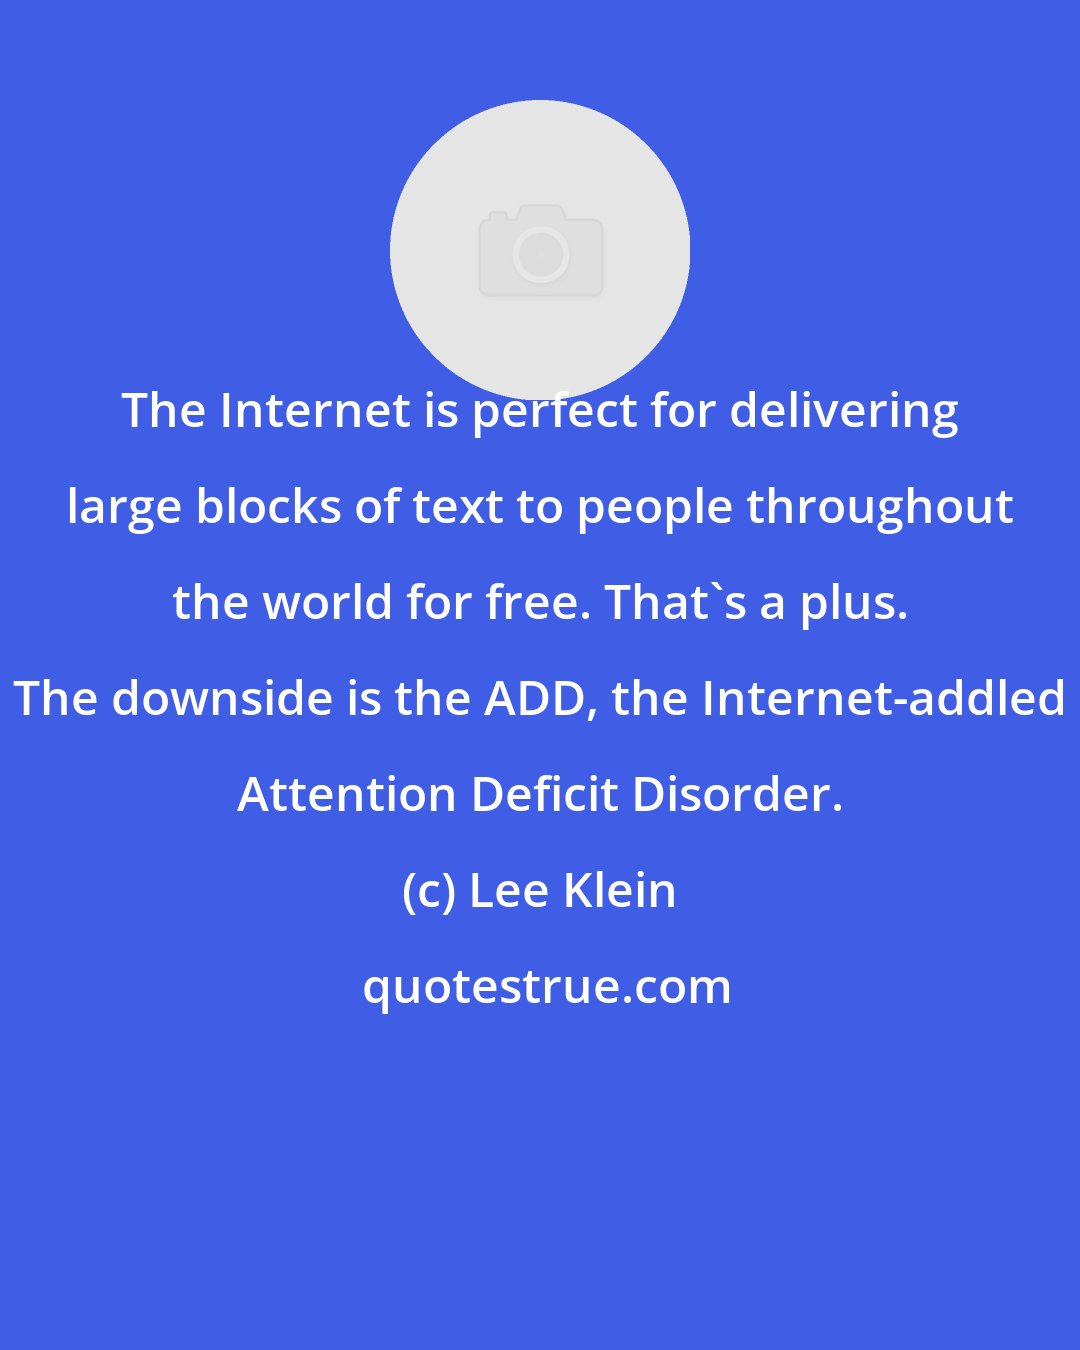 Lee Klein: The Internet is perfect for delivering large blocks of text to people throughout the world for free. That's a plus. The downside is the ADD, the Internet-addled Attention Deficit Disorder.